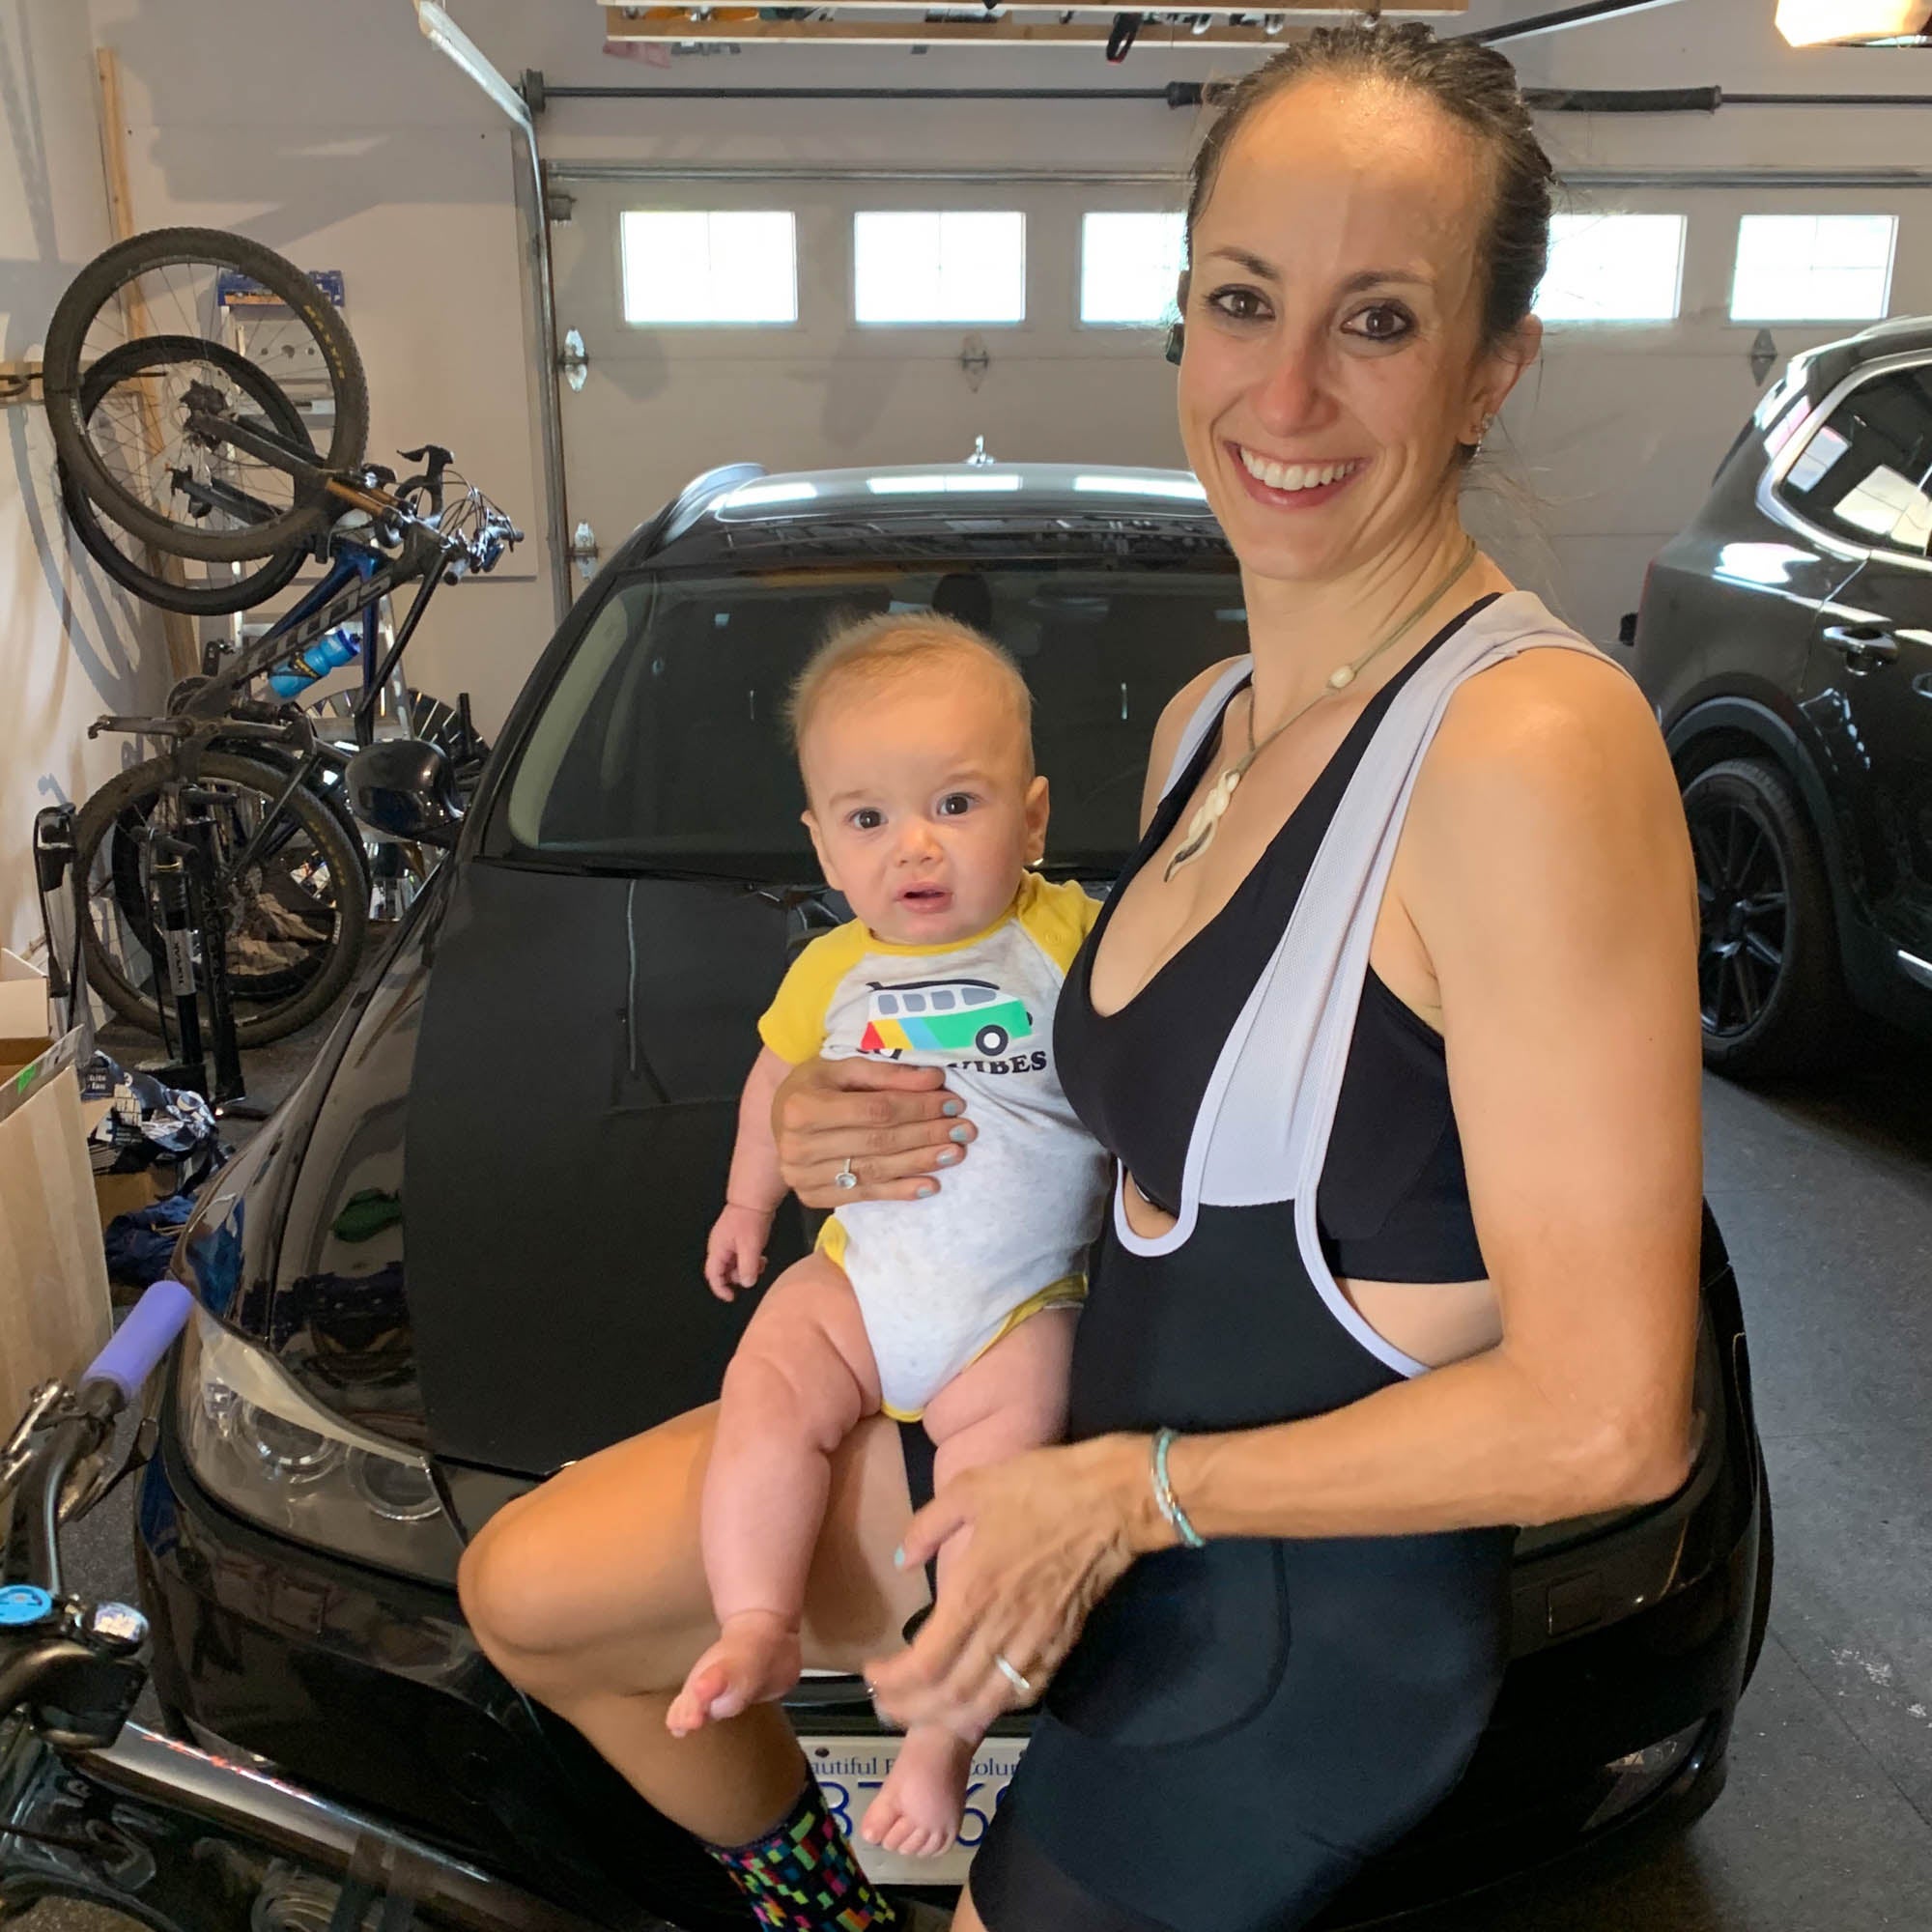 Sonya holds her son while sitting on an indoor trainer in the garage